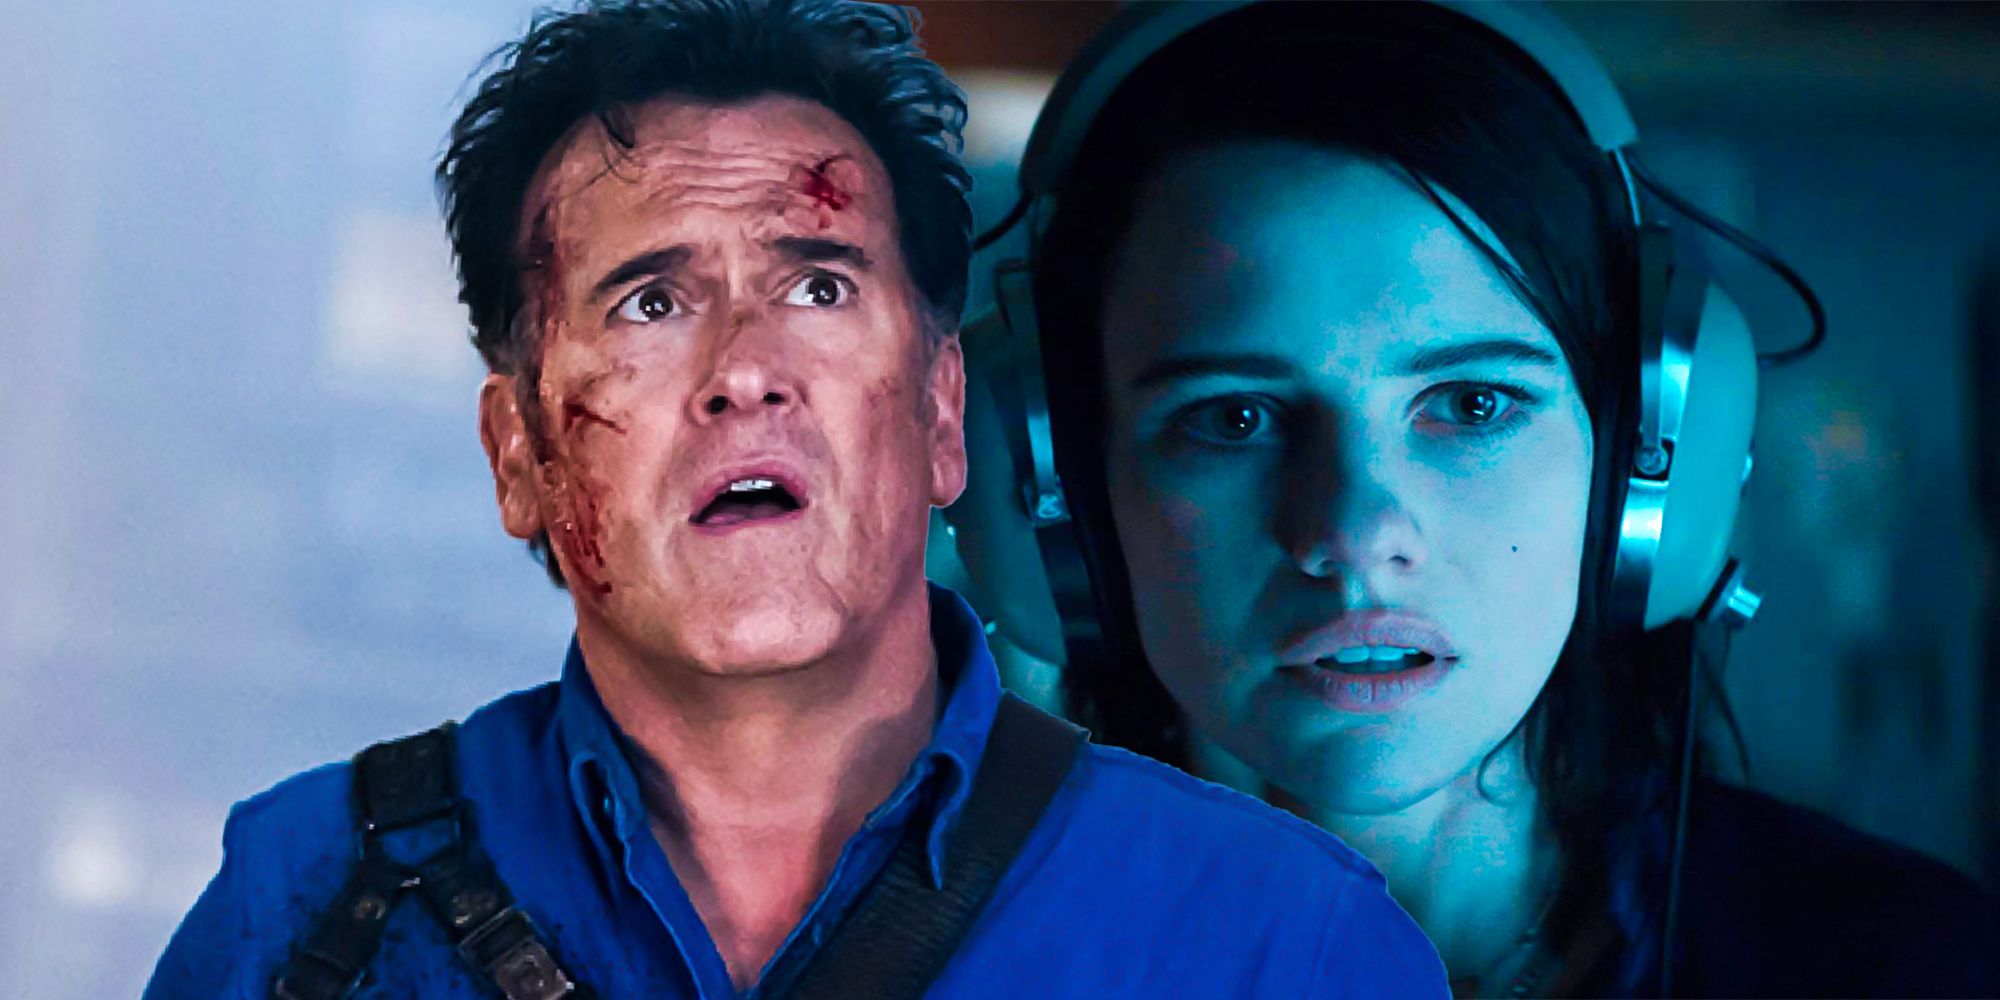 Evil Dead Star Addresses Possible Spinoff Return: "There's Been Many Conversations"